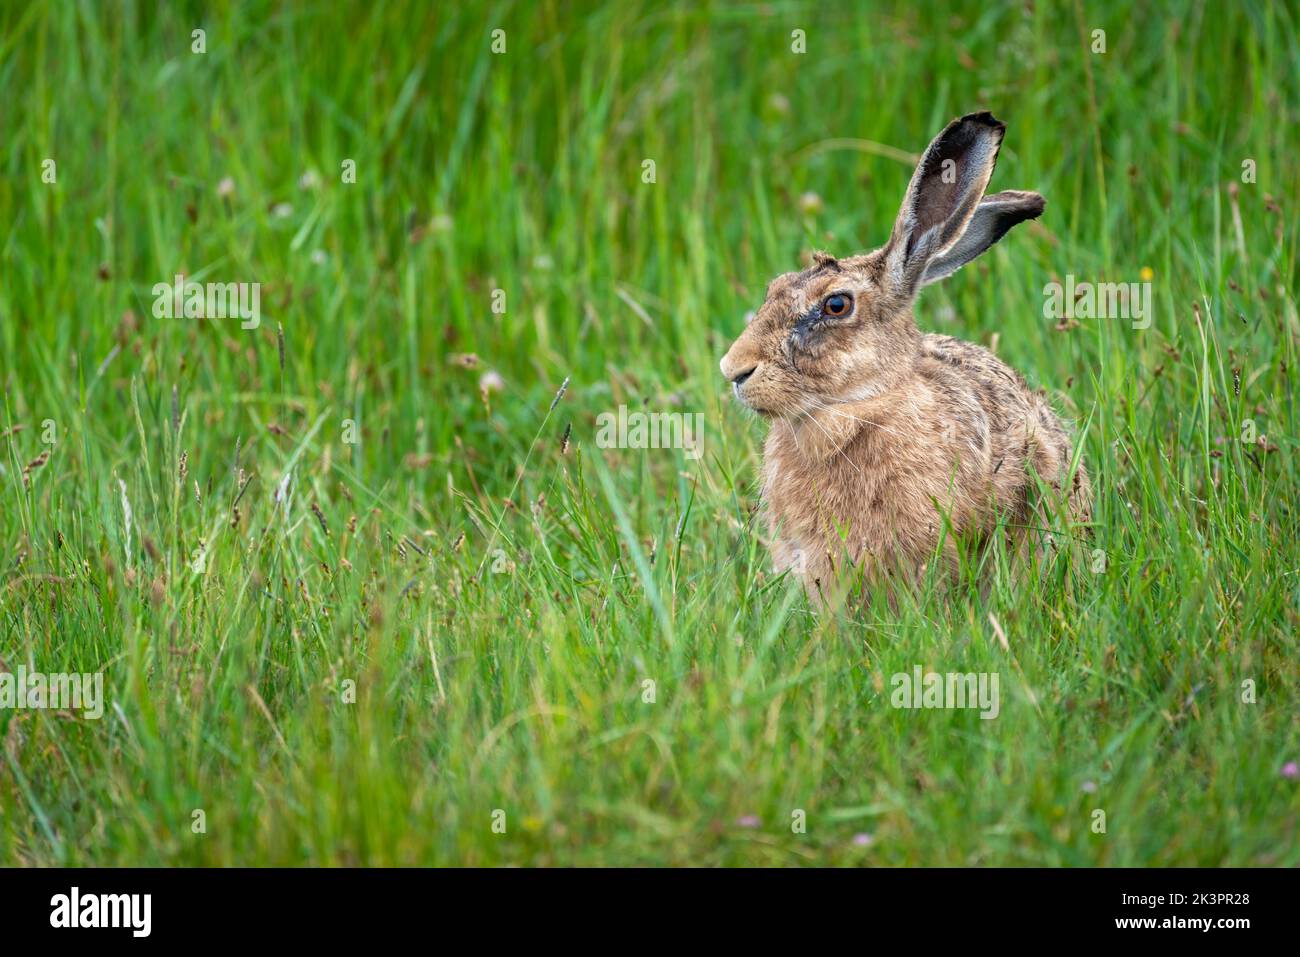 European Brown Hare (Lepus europaeus) sitting in grass field during hunting season in France Stock Photo